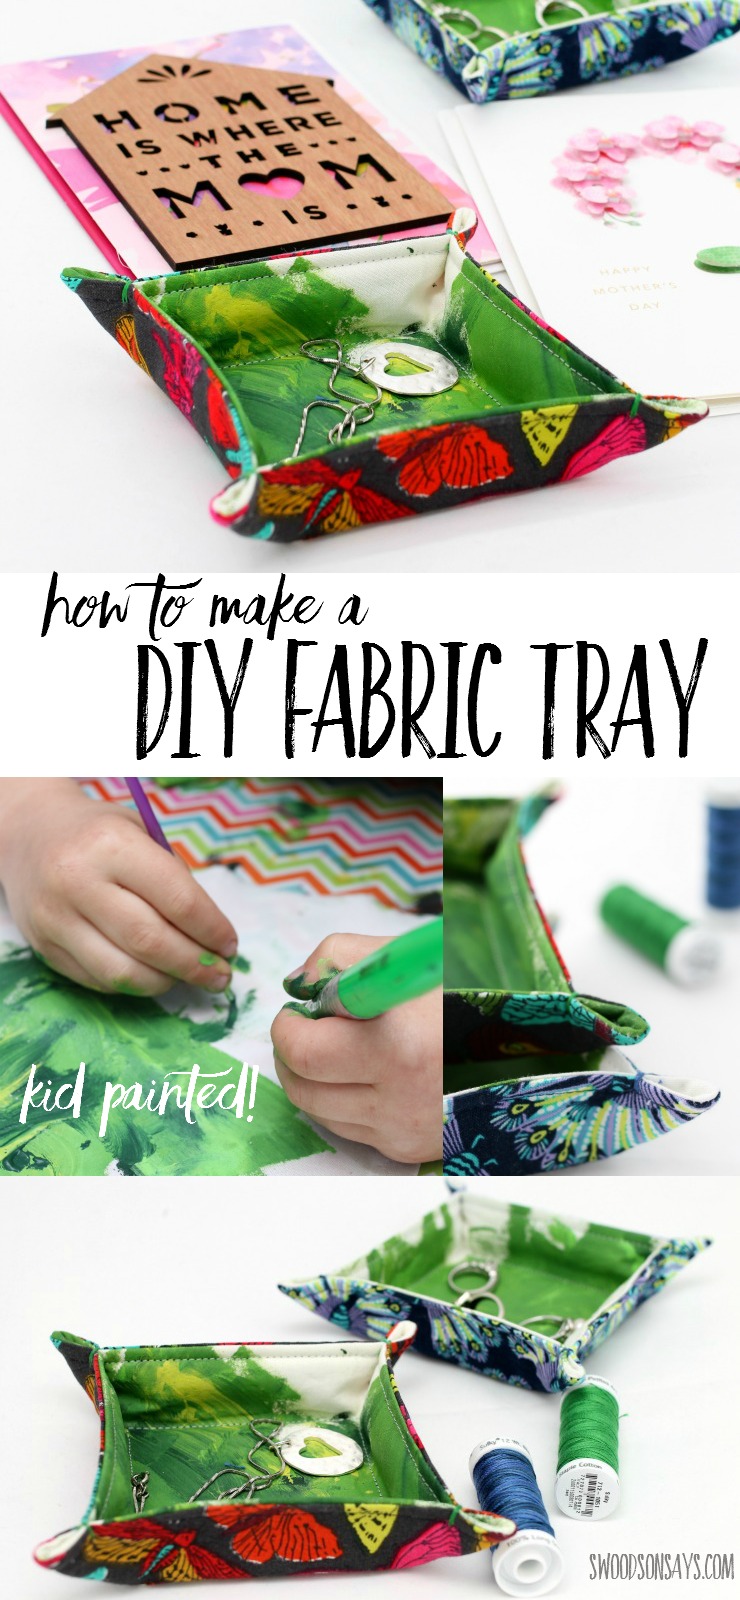 How To Make a Fabric Tray - let your kids join in and paint fabric to make a gift for Mother's Day! Fabric trinket trays are a great beginner sewing project that uses up fabric scraps. #ad #hallmarkformom #socialfabric